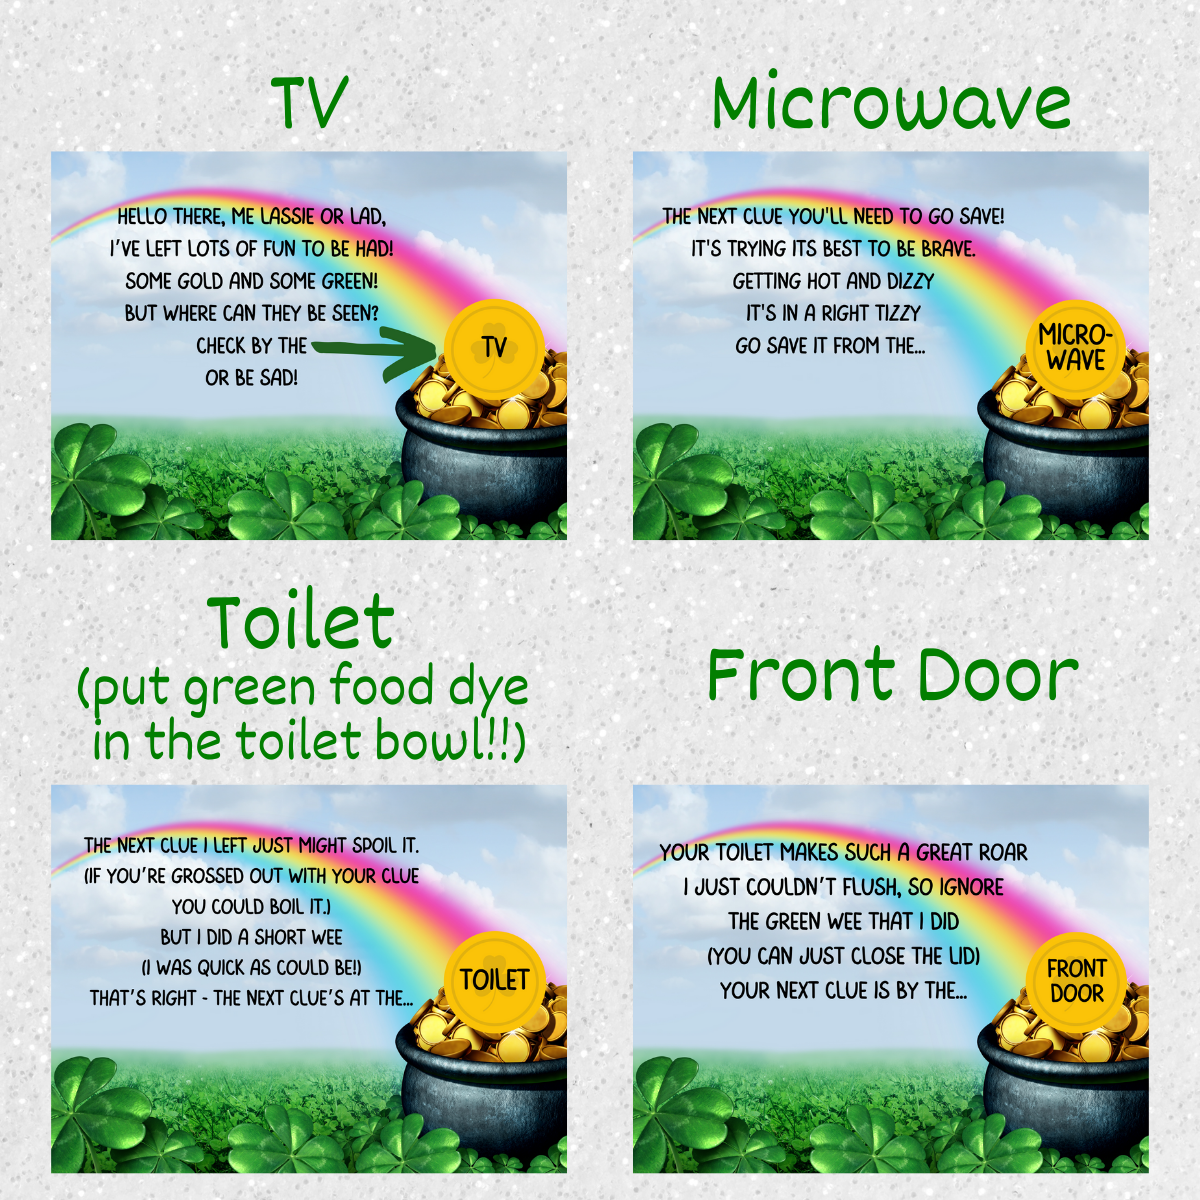 Four example cards are shown, with the locations of each labeled as: TV, Microwave, Toilet (put green food dye in the toilet bowl!!), Front Door.